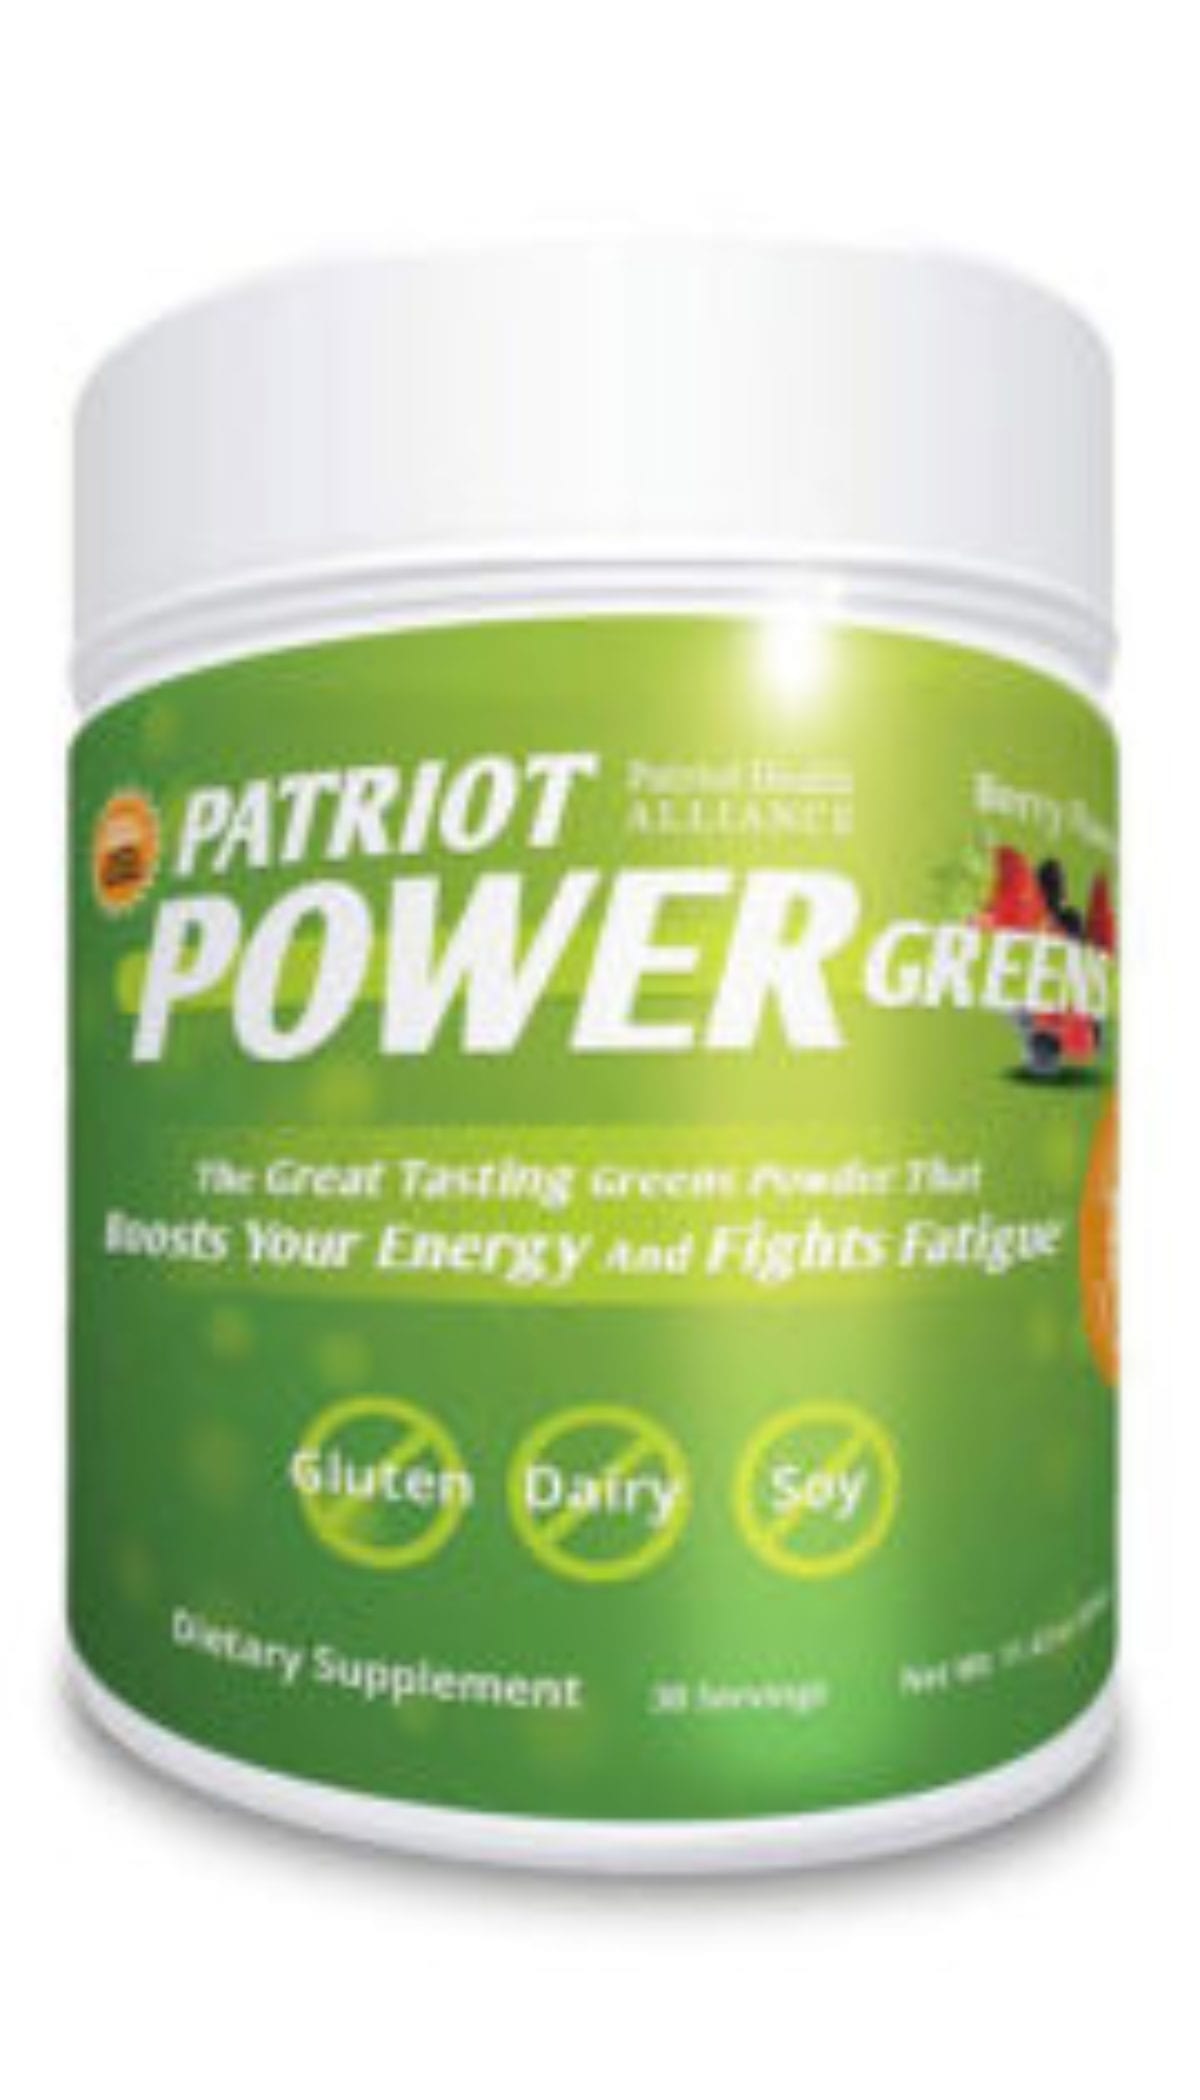 Patriot Power Greens Review: Helps You Remain A Real Trooper?